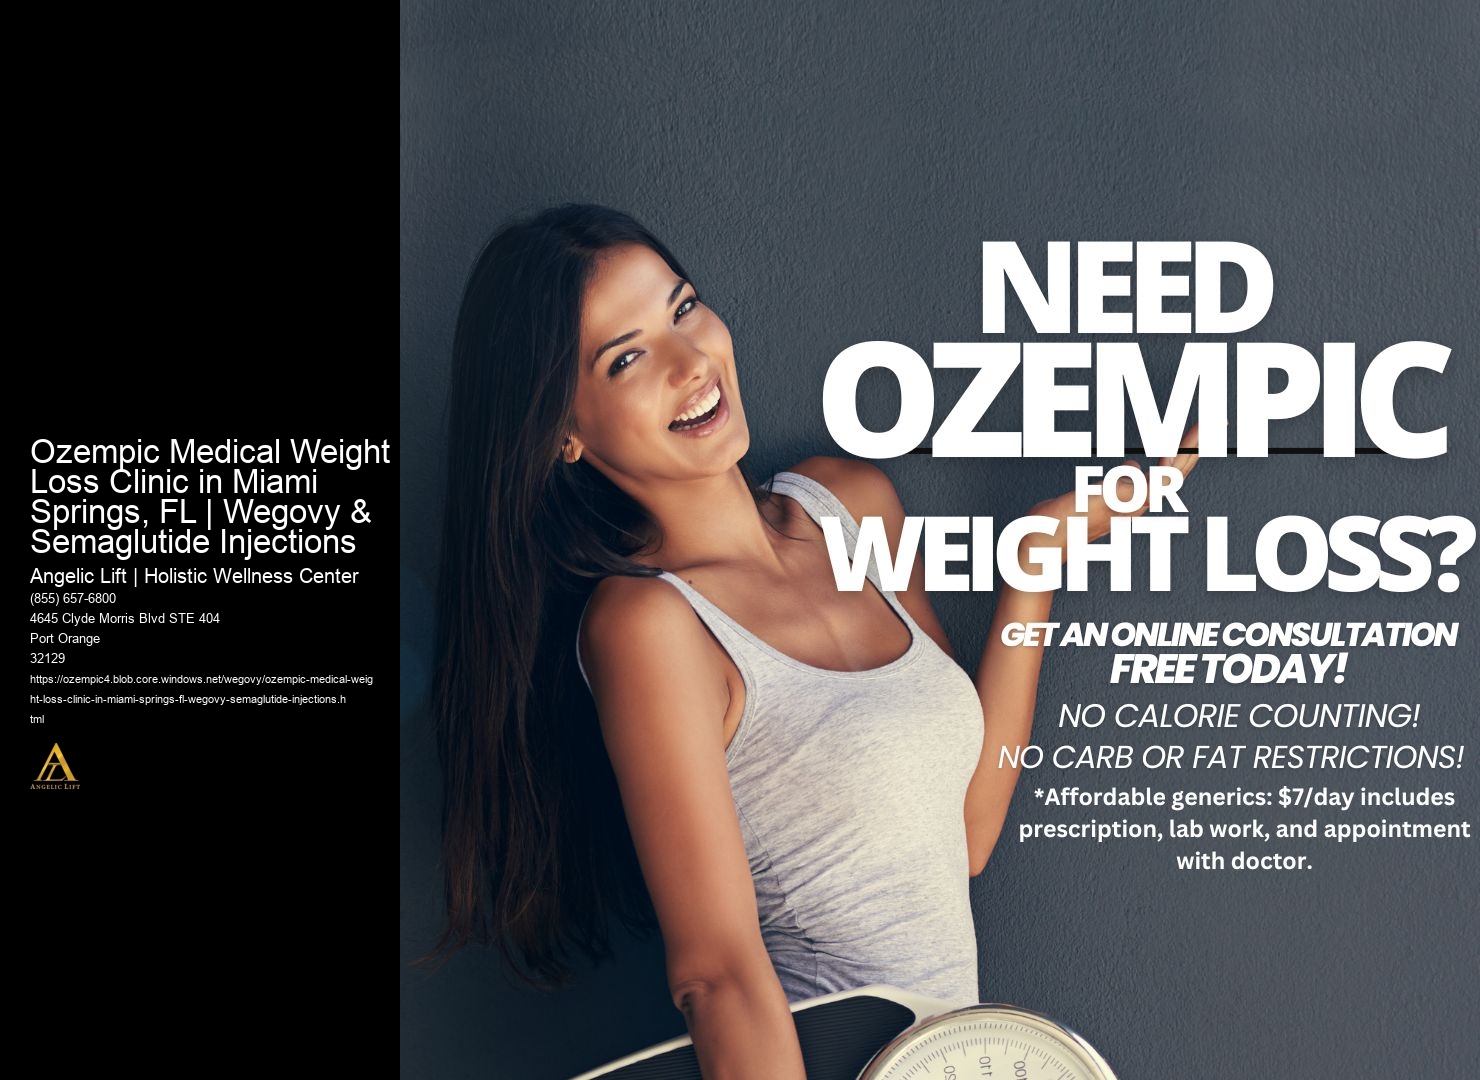 Ozempic Medical Weight Loss Clinic in Miami Springs, FL | Wegovy & Semaglutide Injections